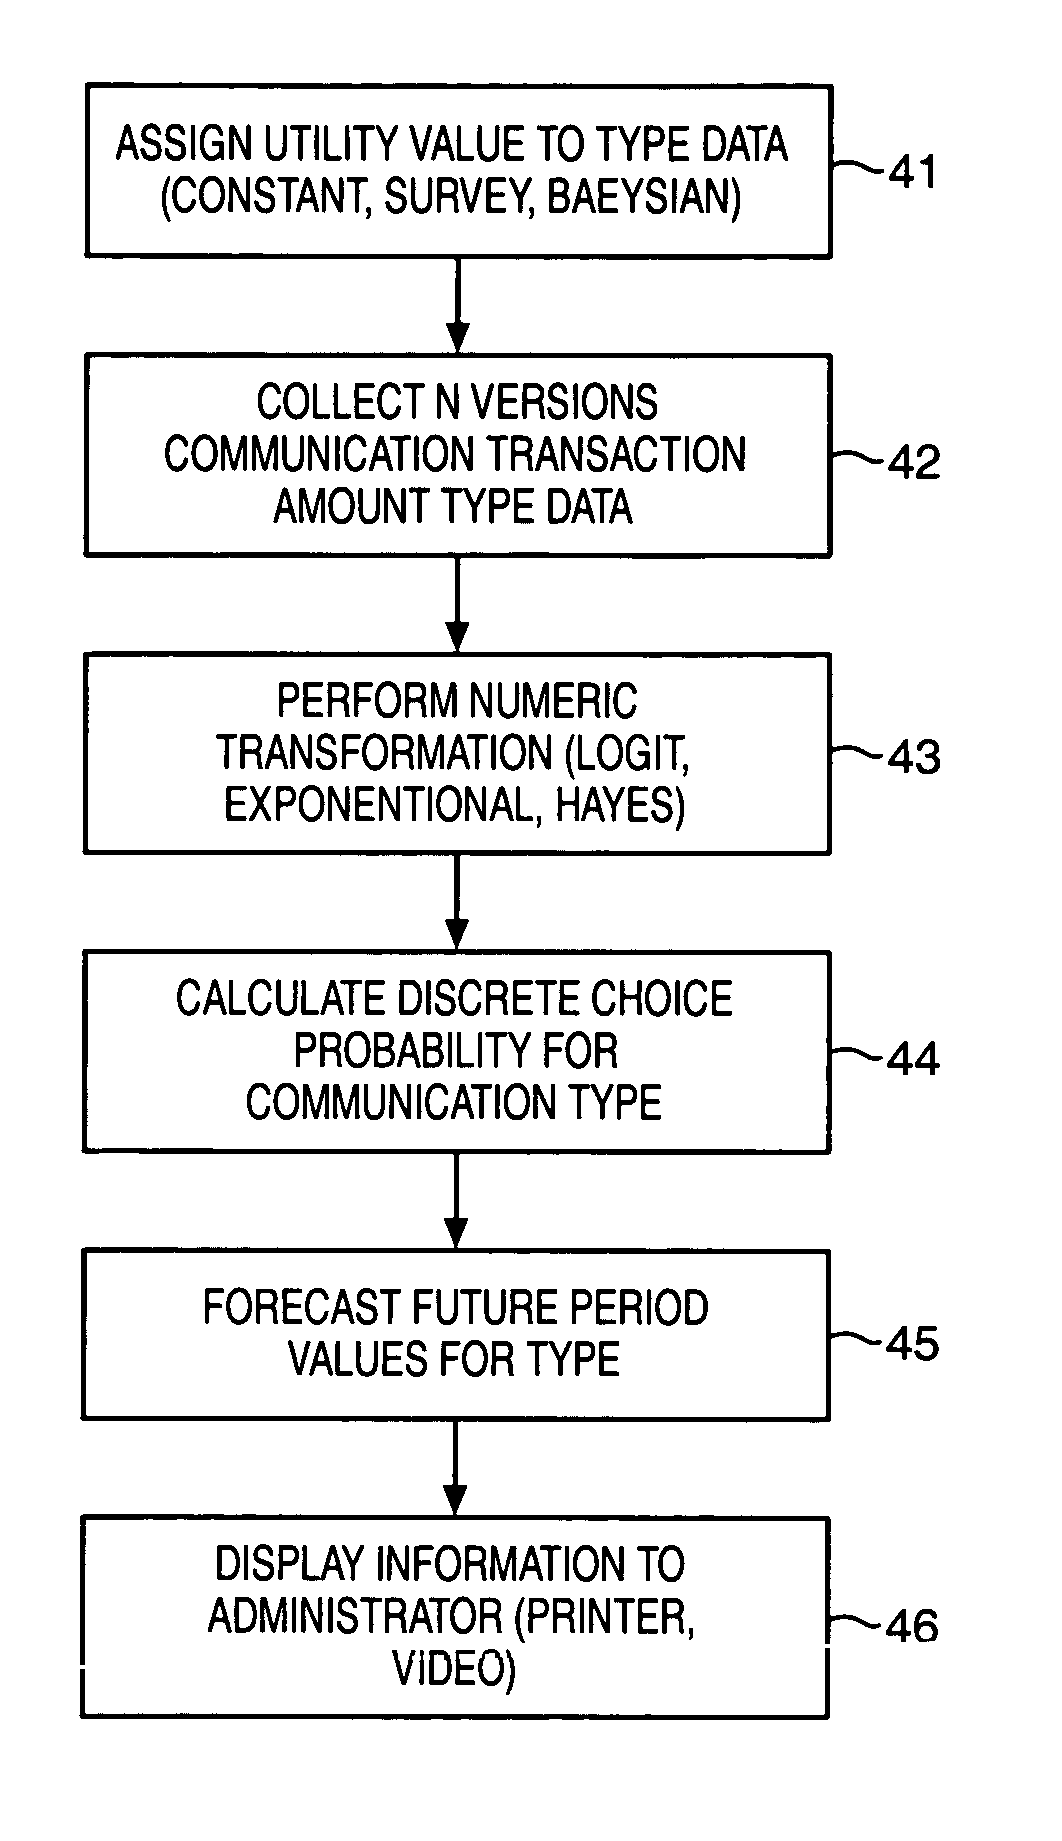 Discrete choice method of reporting and predicting multiple transaction types